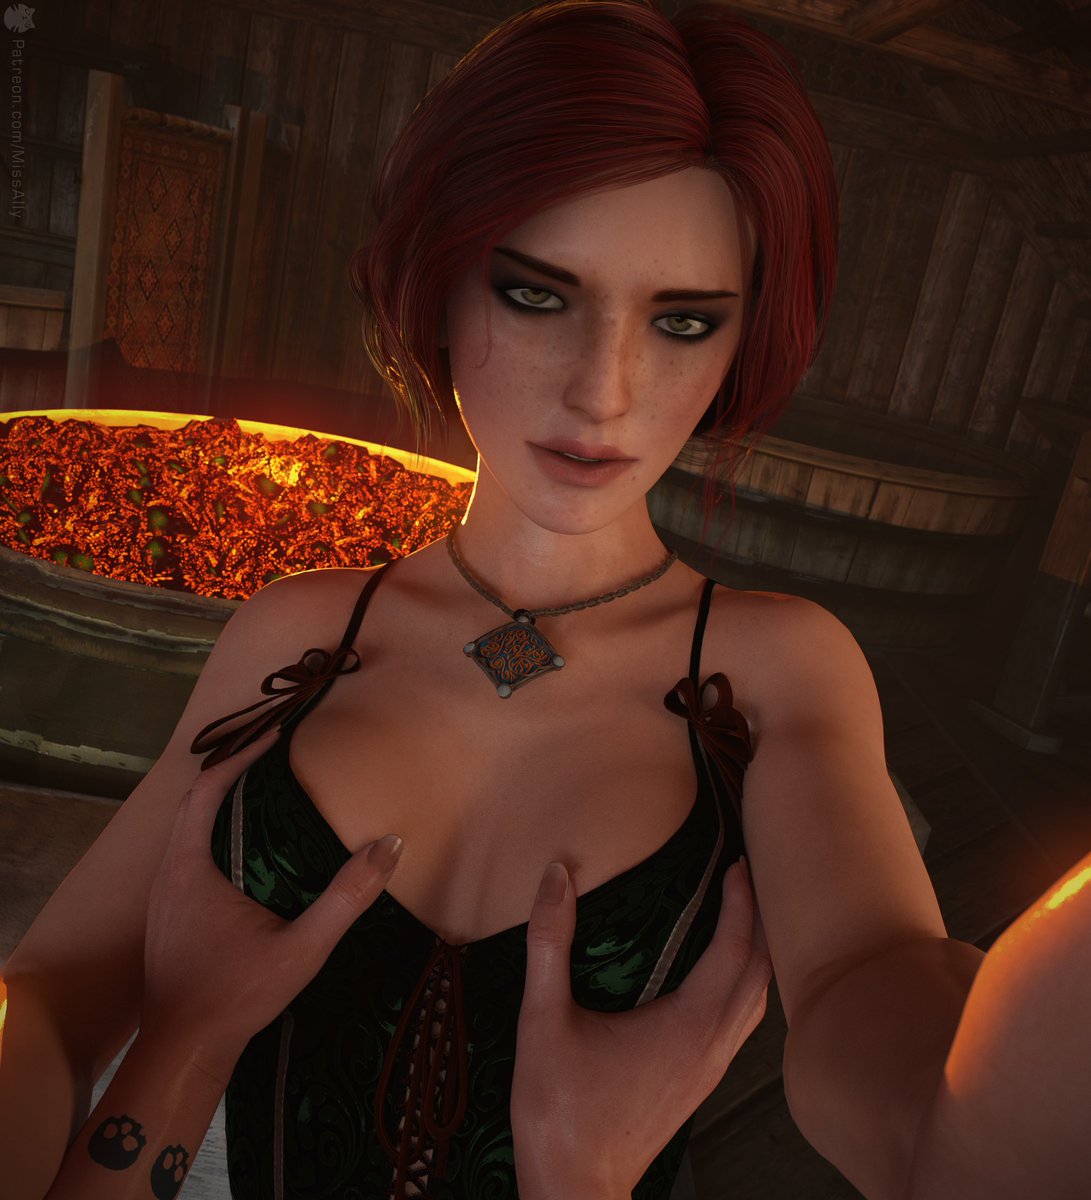 Triss Merigold, The Witcher #TheWitcher3 #TheWitcher #The_Witcher #Triss #T...